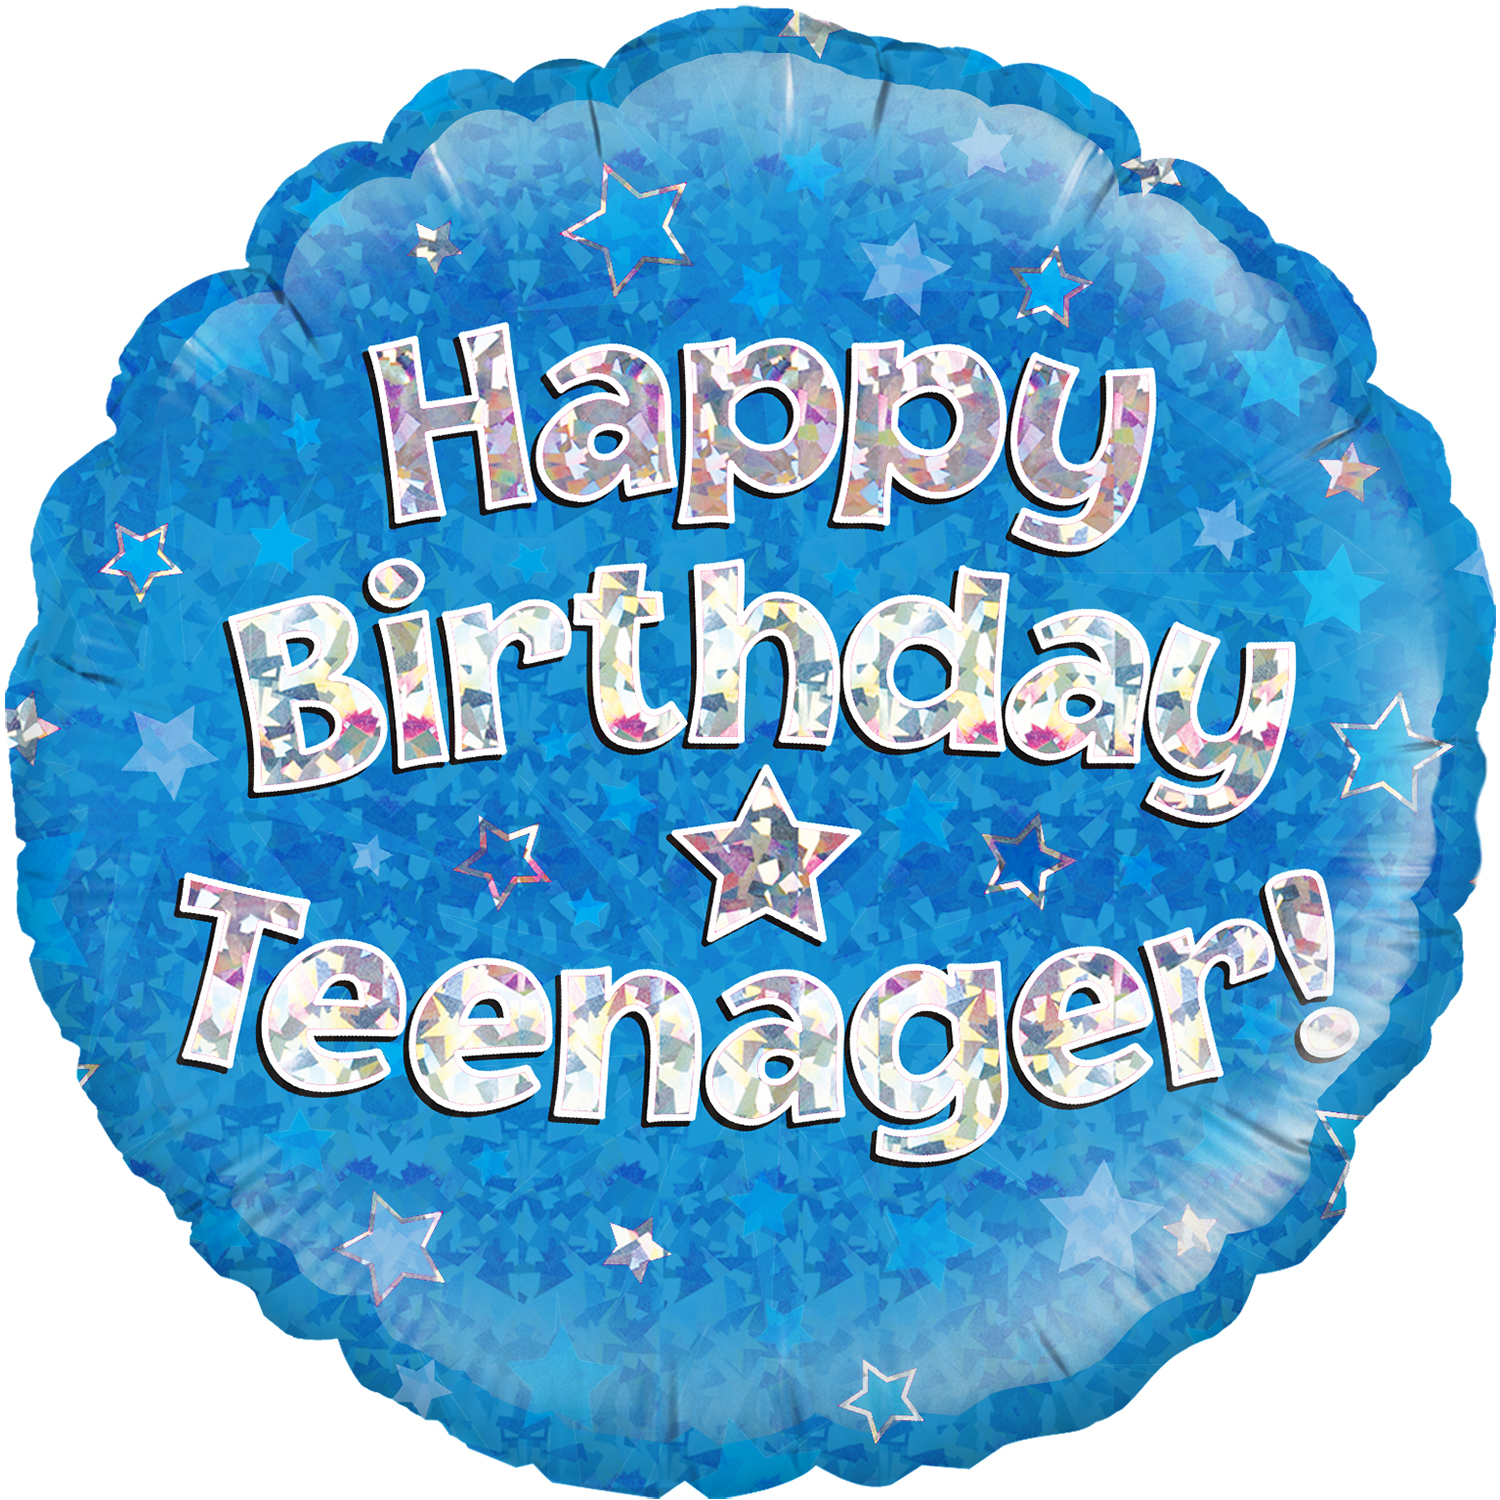 18" Happy Birthday Teenager Blue Holographic Oaktree Foil Balloon